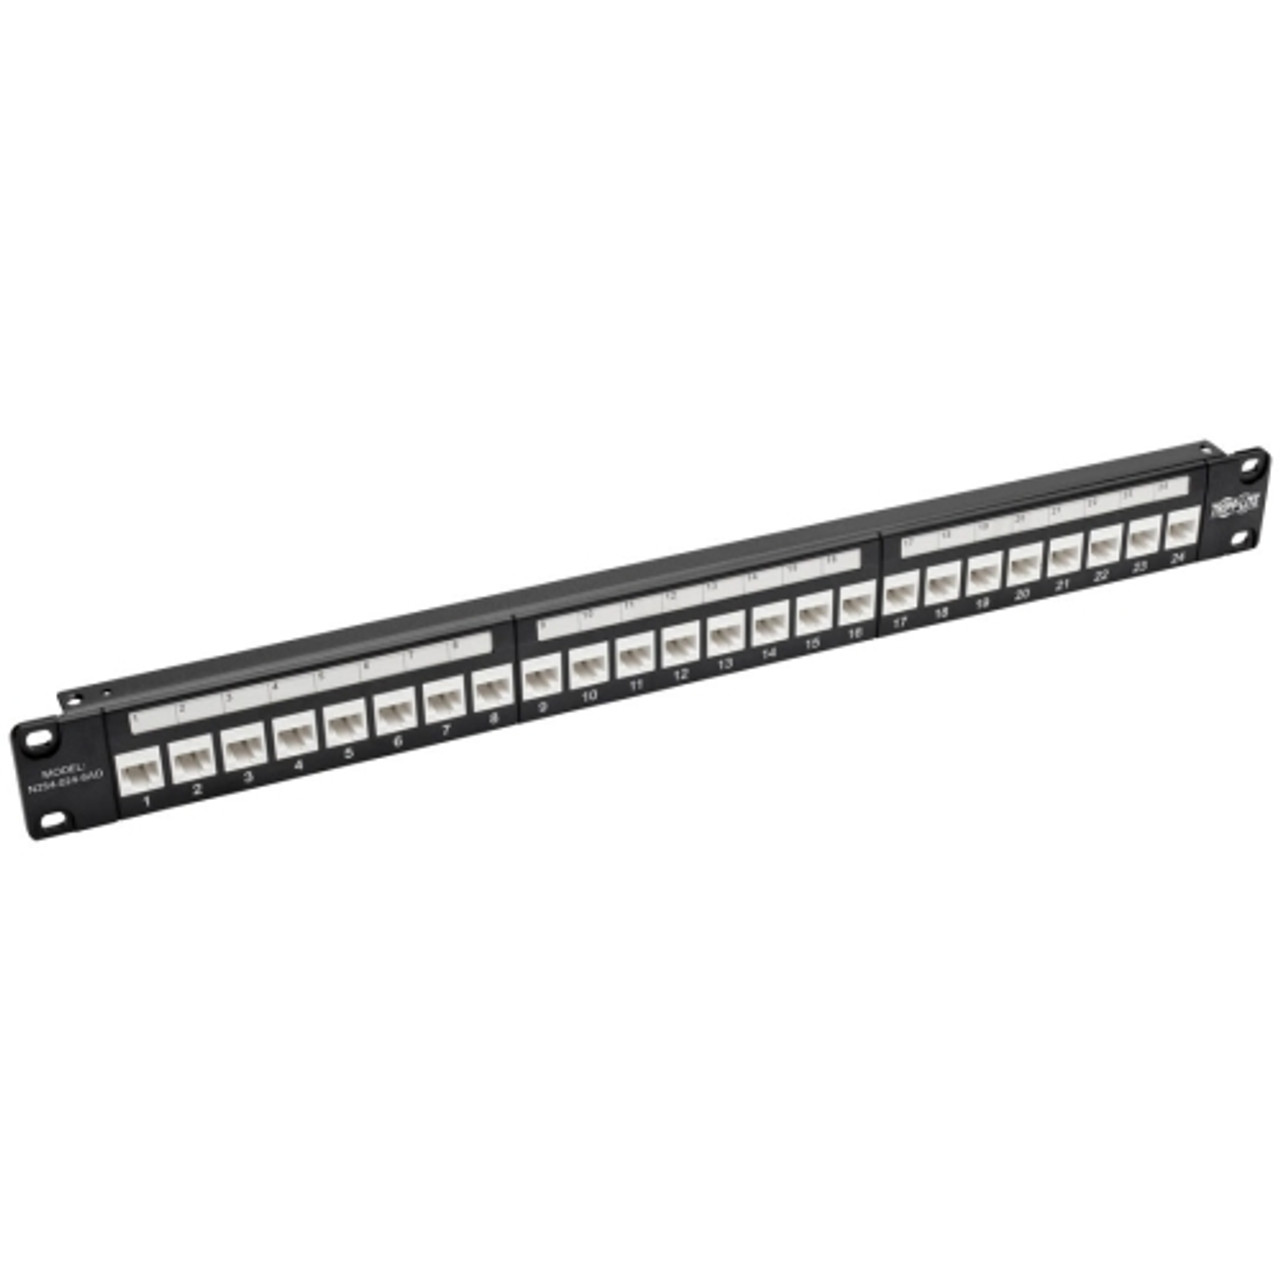 N254-024-6AD Tripp Lite 24-Ports Cat6a Patch Panel 1urm Accs Feedthrough W Down-angled